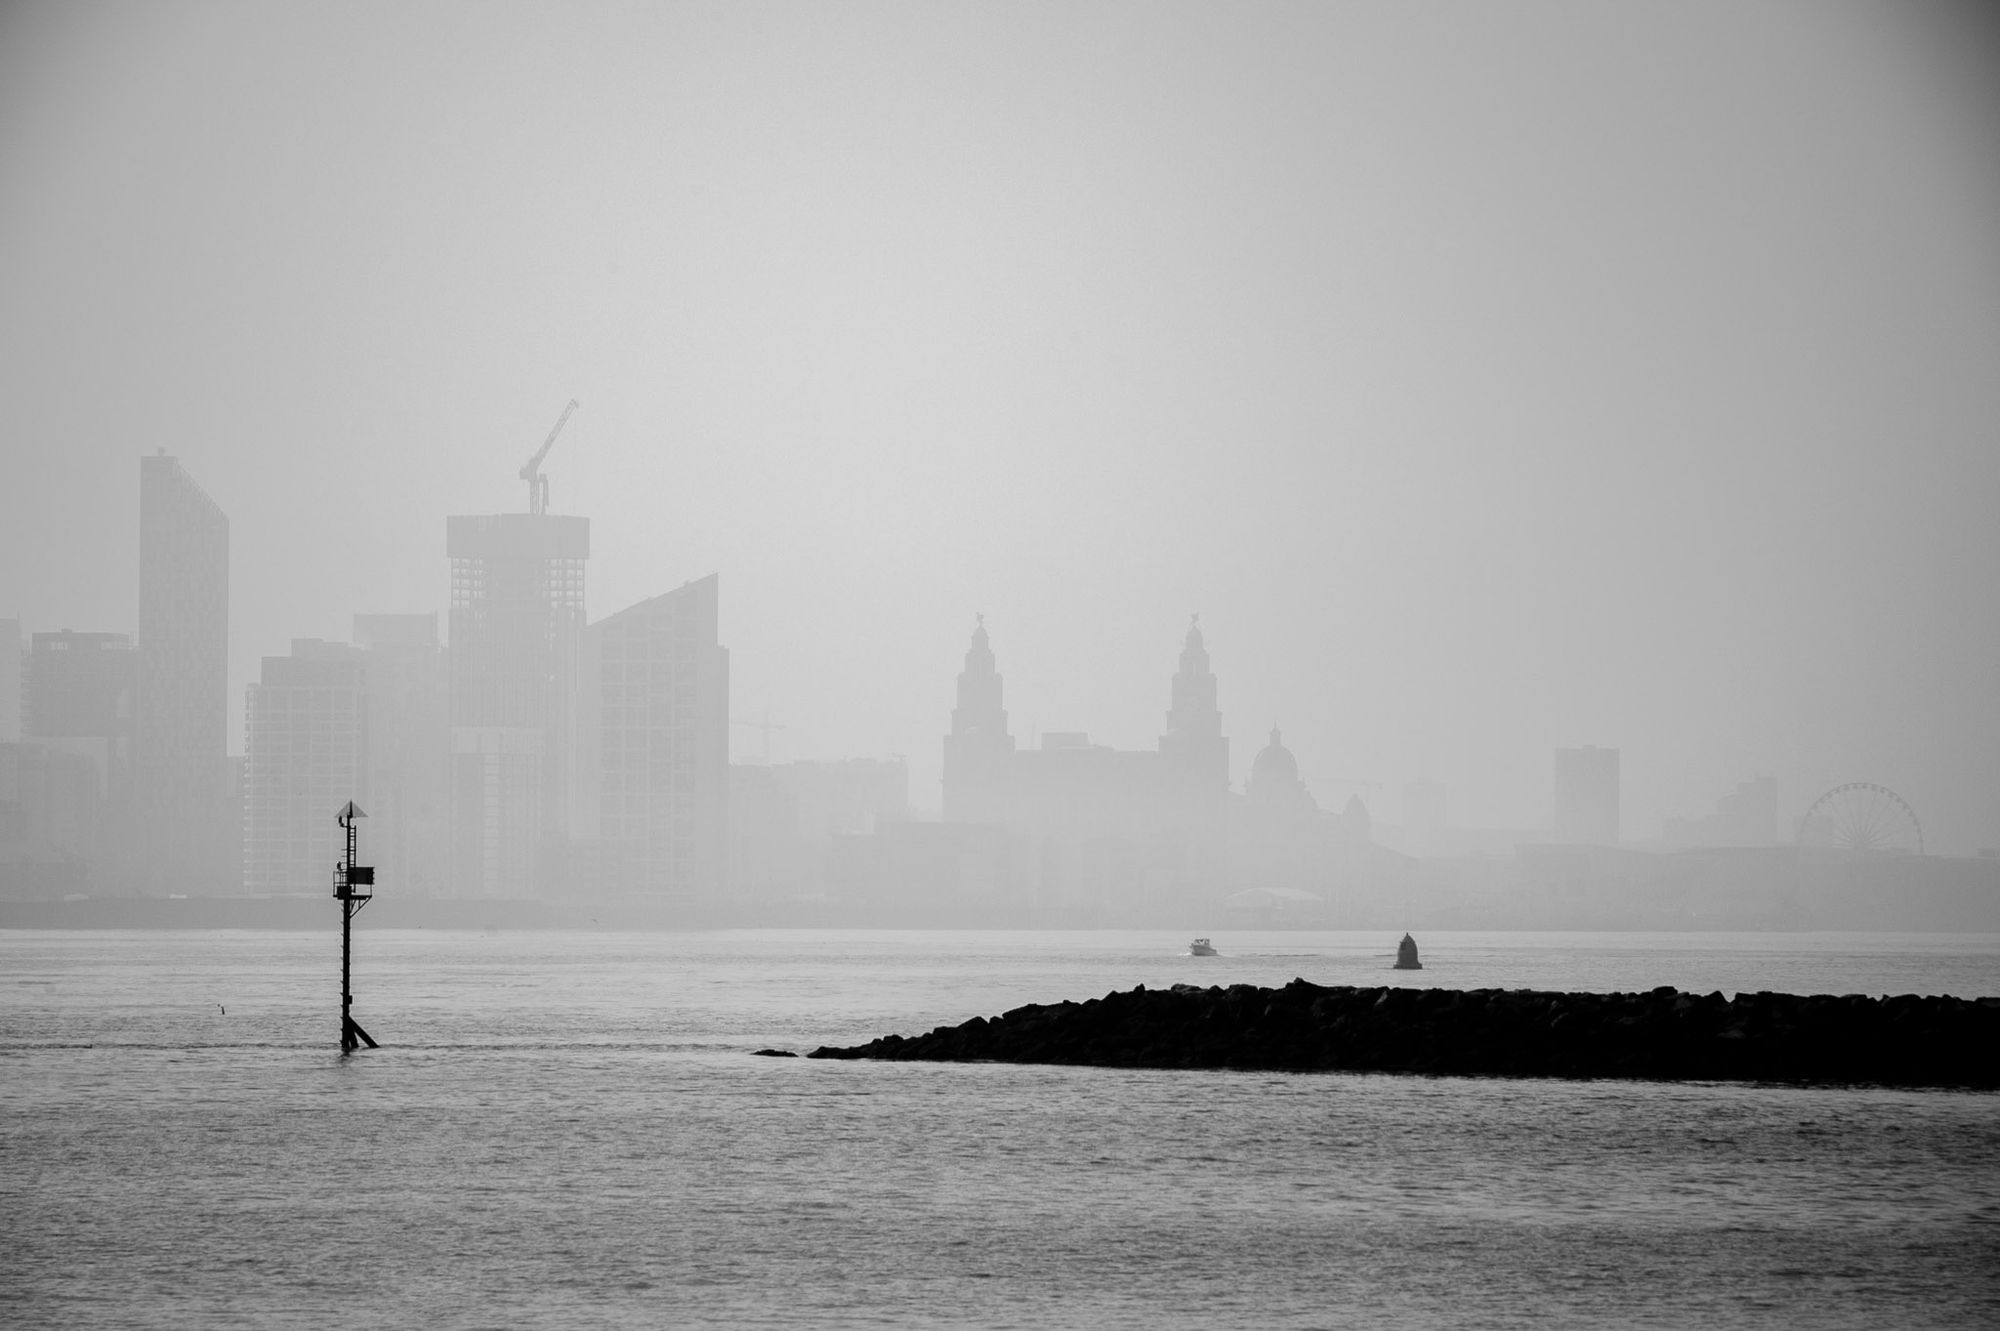 The skyline of the city of Liverpool silhouetted on a hazy day.